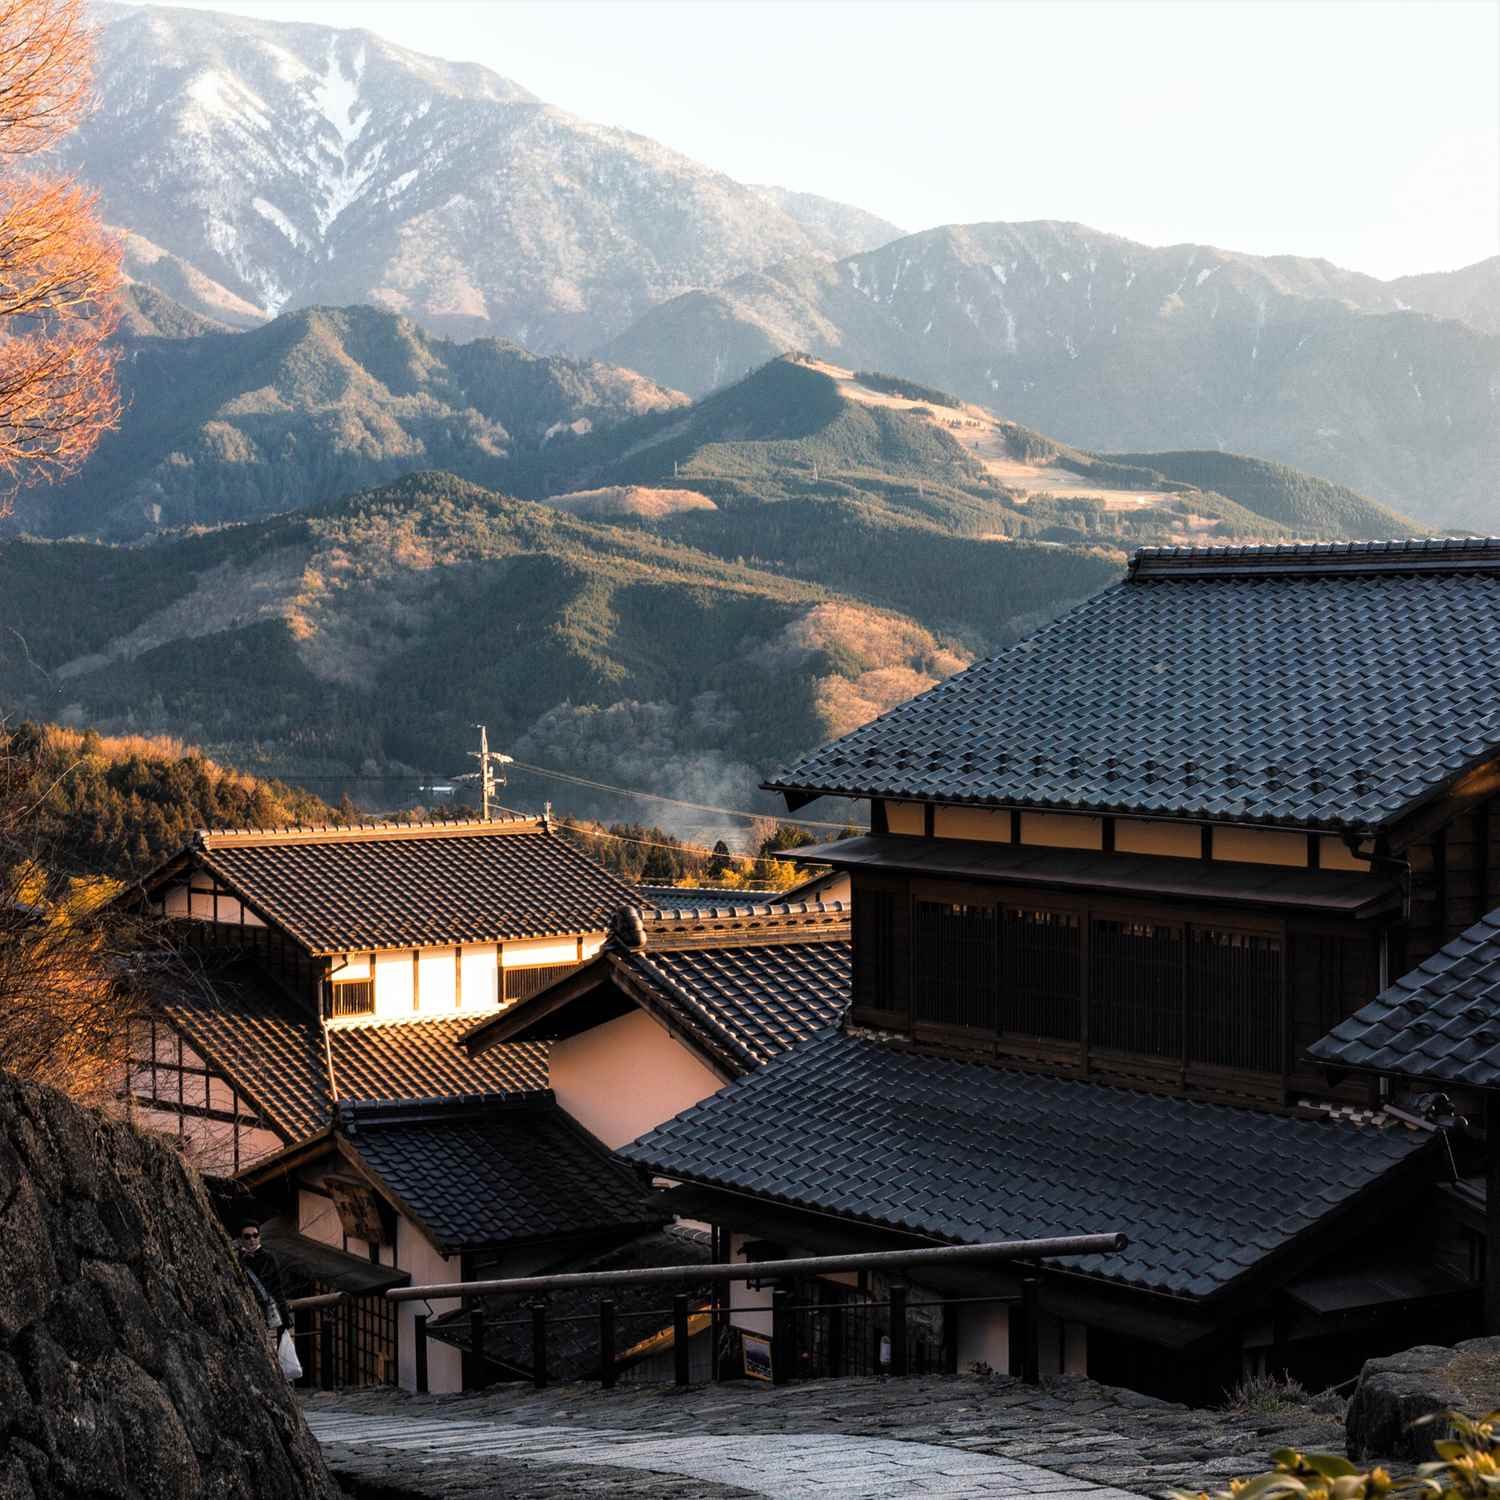 Magome and Tsumago where the image of post towns in the Edo period are left = Shutterstock 6